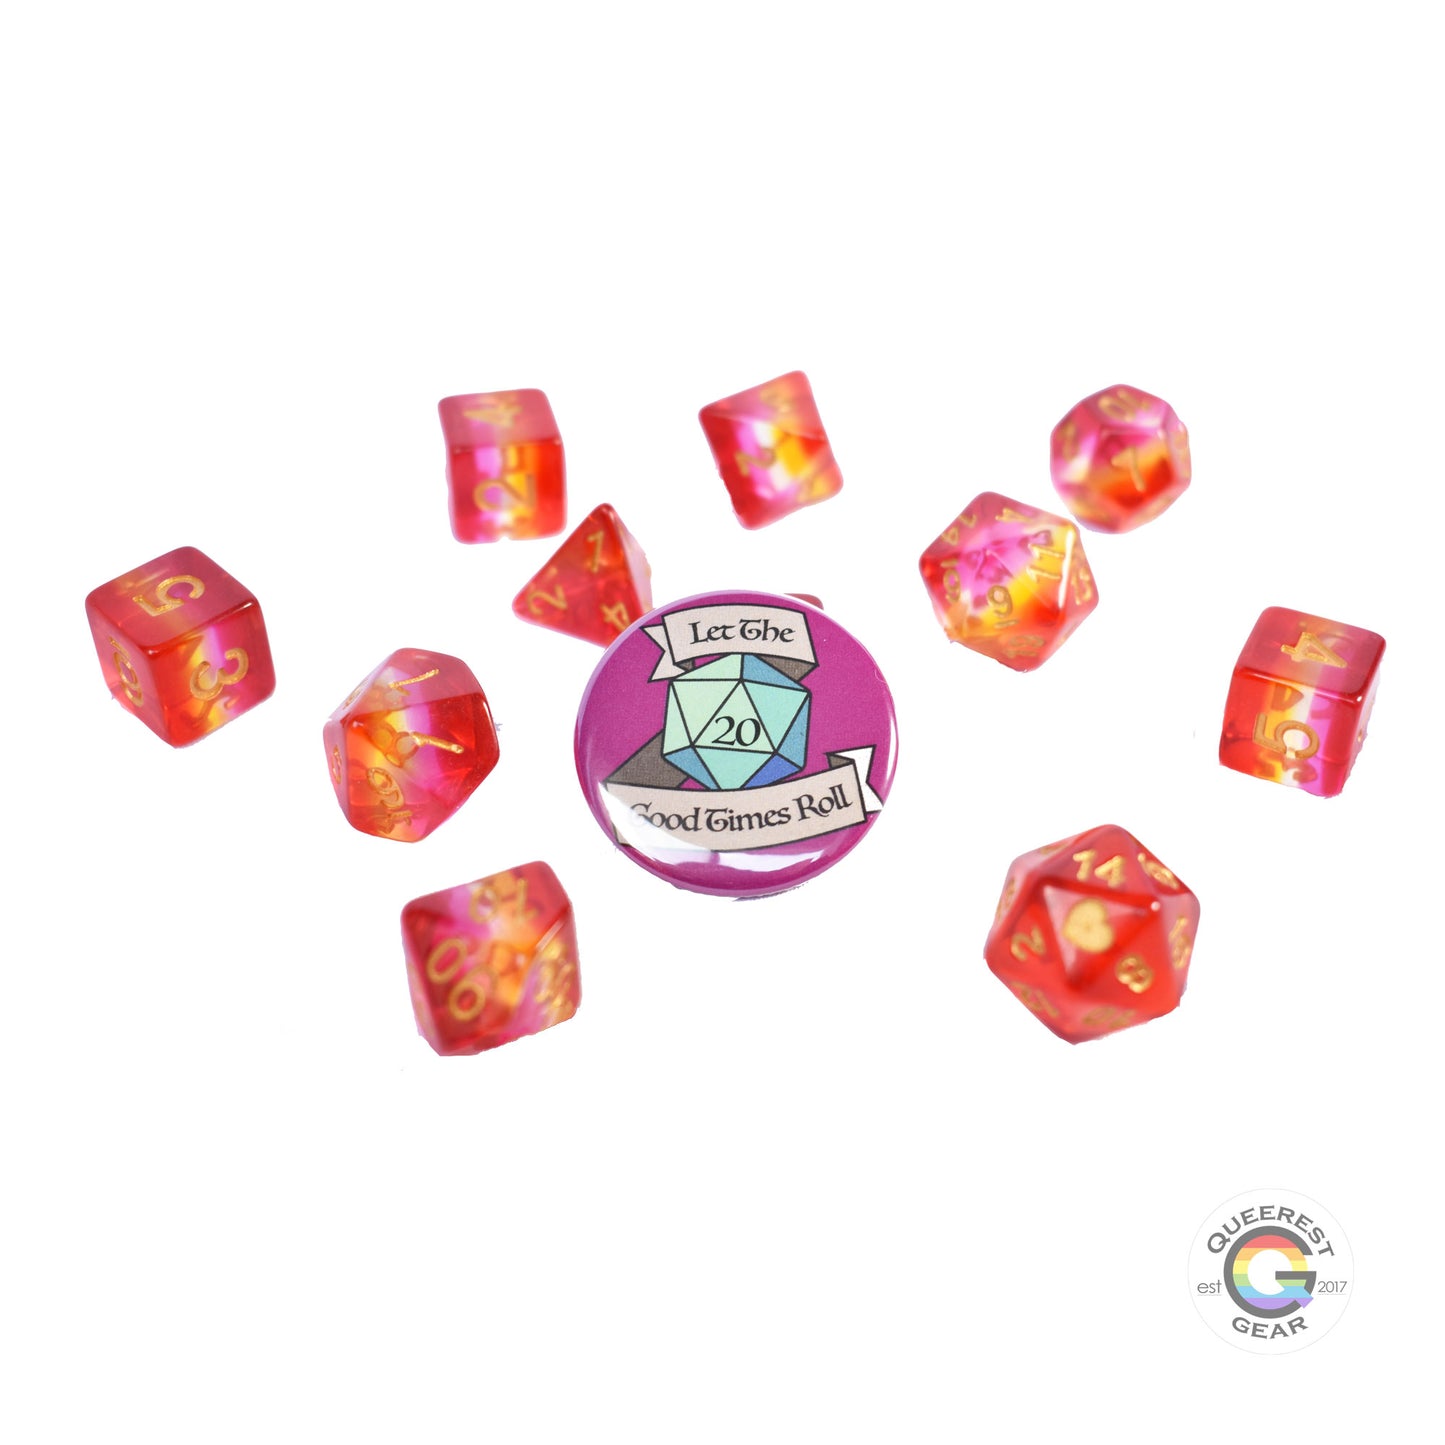 11 piece set of polyhedral dice scattered on a white background. They are transparent and colored in the stripes of the lesbian flag with gold ink. There is the freebie “let the good times roll” pinback button among them.